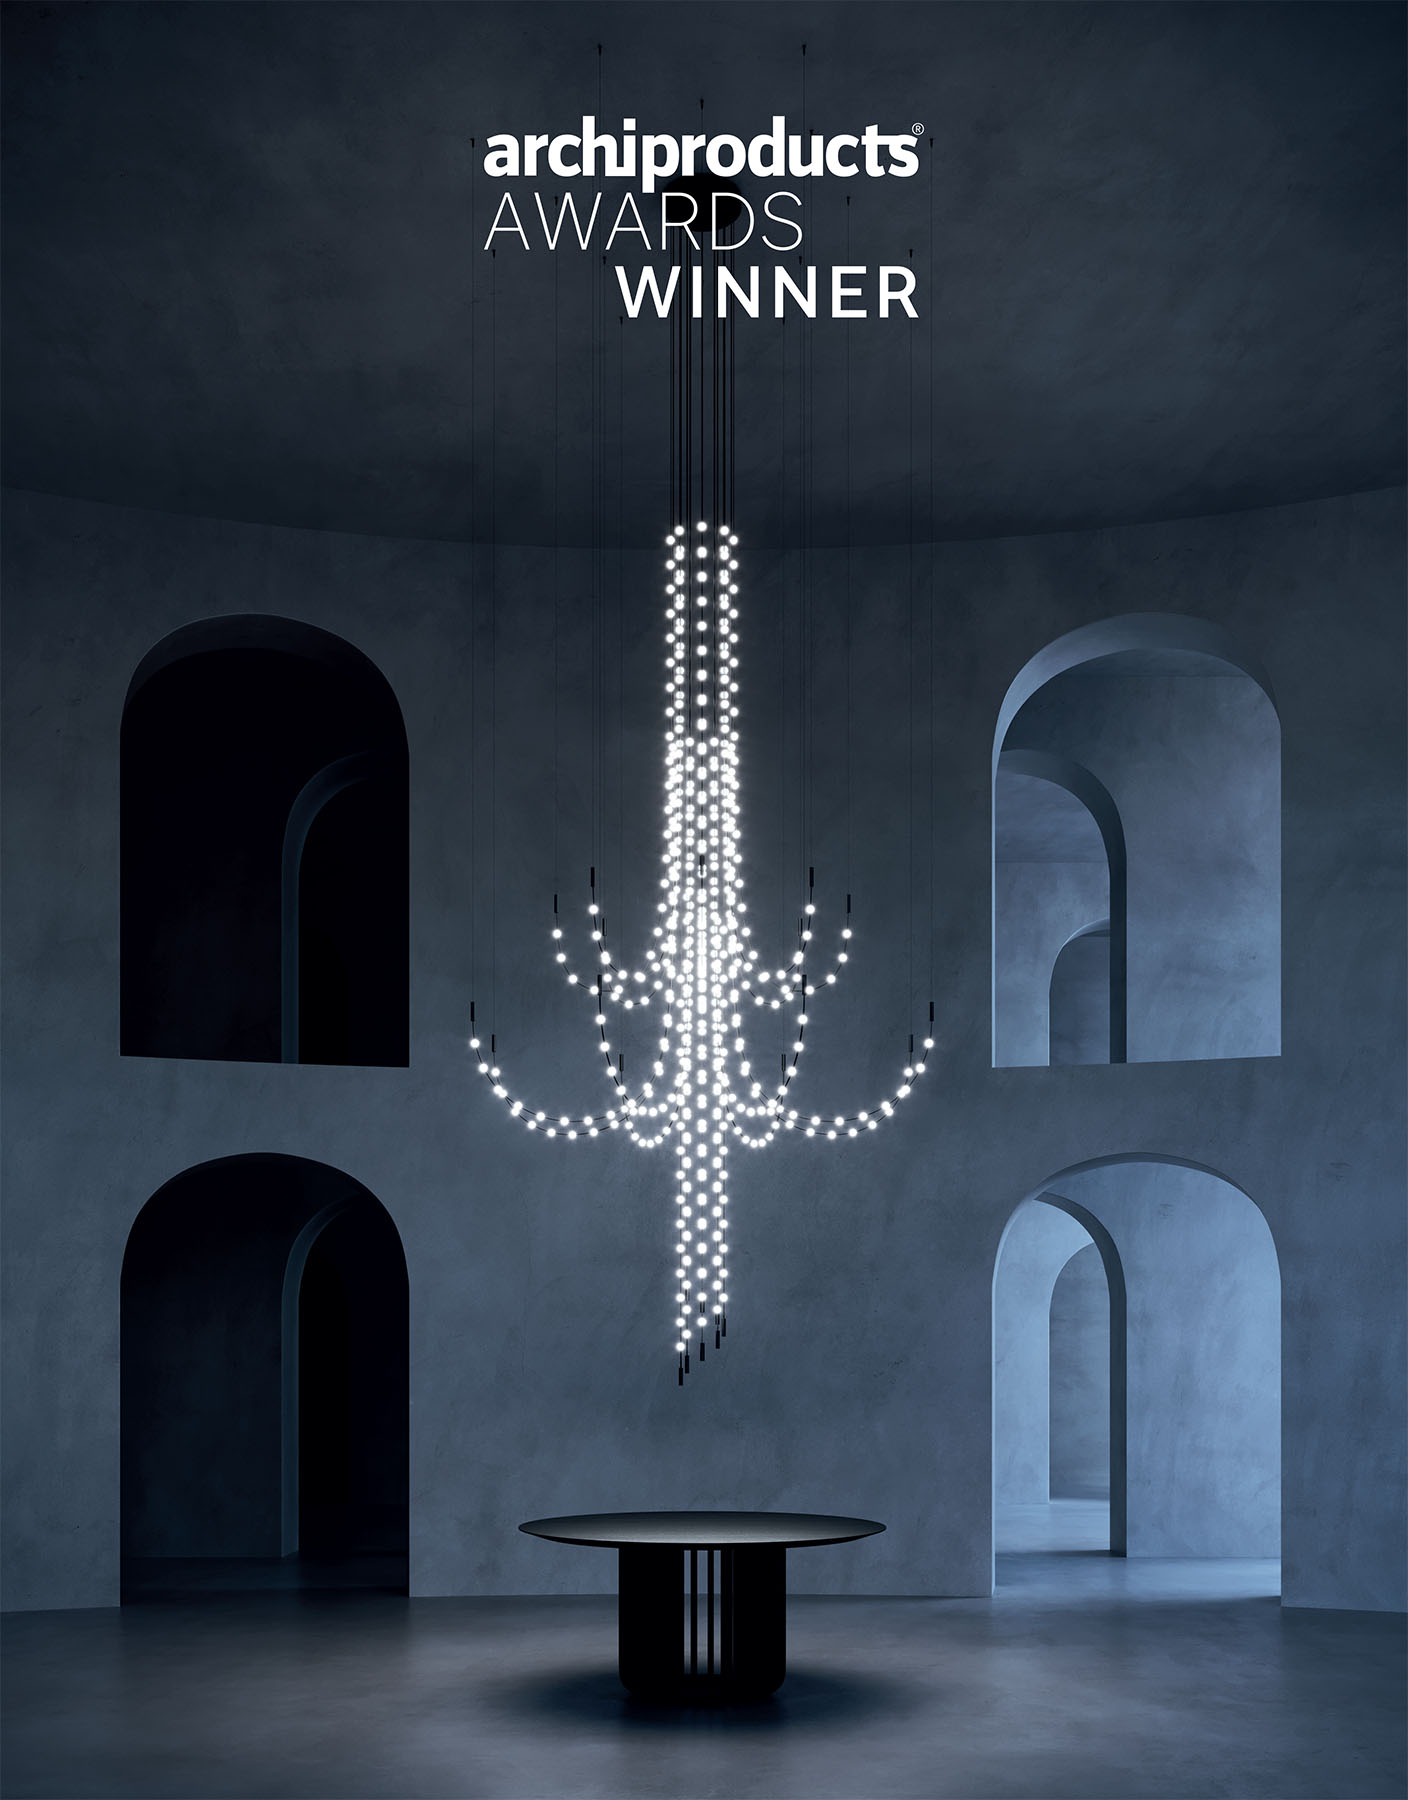 Multidot wins the Archiproducts Design Awards